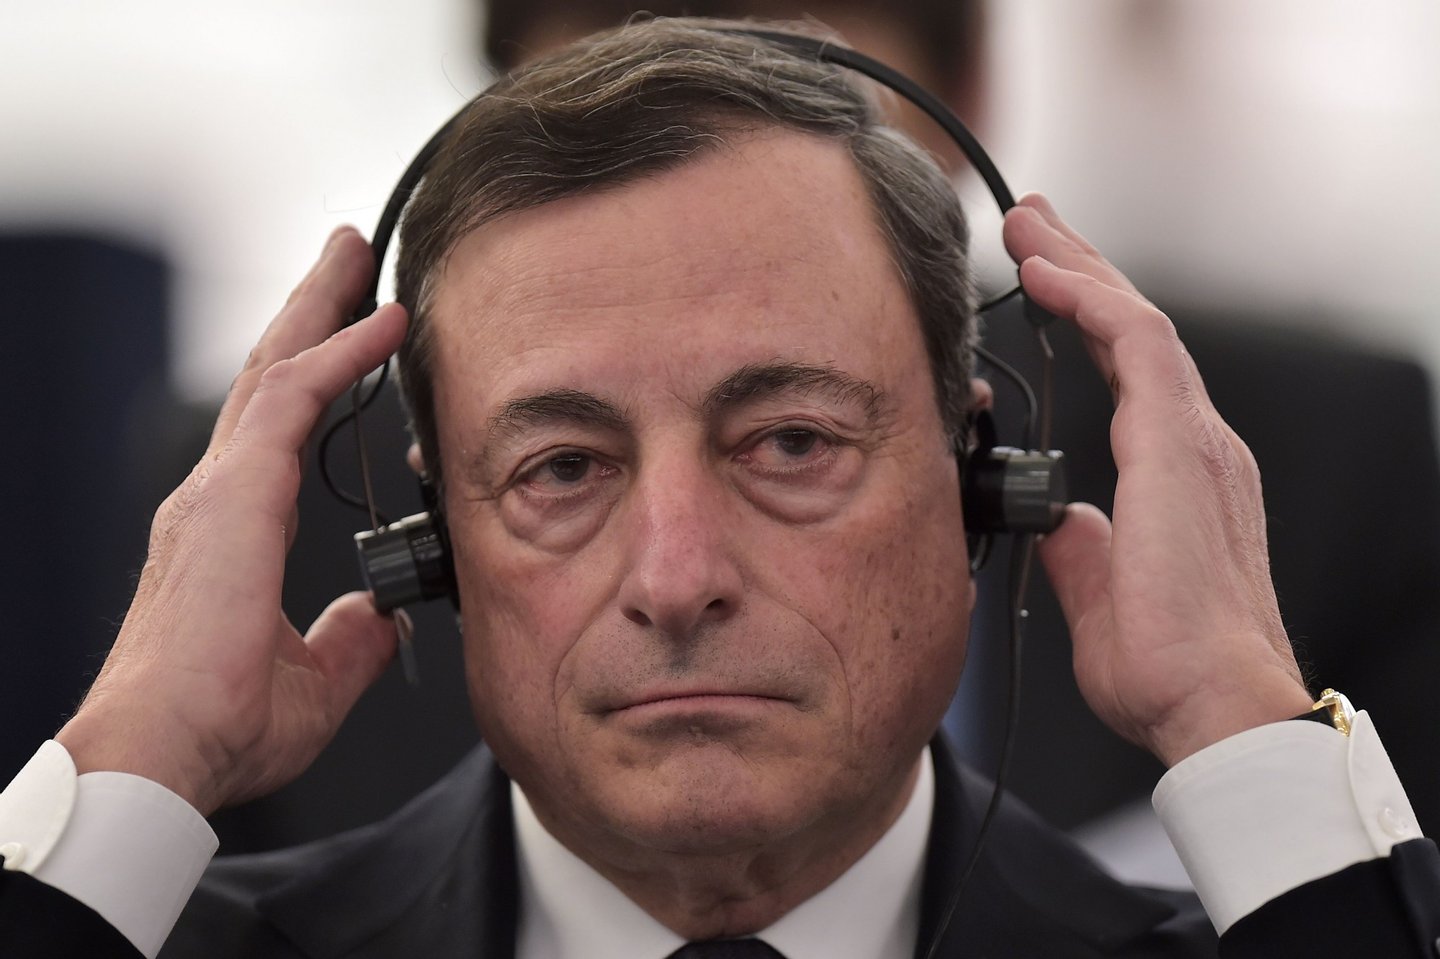 President of the European Central Bank (ECB) Mario Draghi adjusts his headphones as he attends a debate at the European Parliament in Strasbourg, eastern France, on February 1, 2016. / AFP / PATRICK HERTZOG (Photo credit should read PATRICK HERTZOG/AFP/Getty Images)